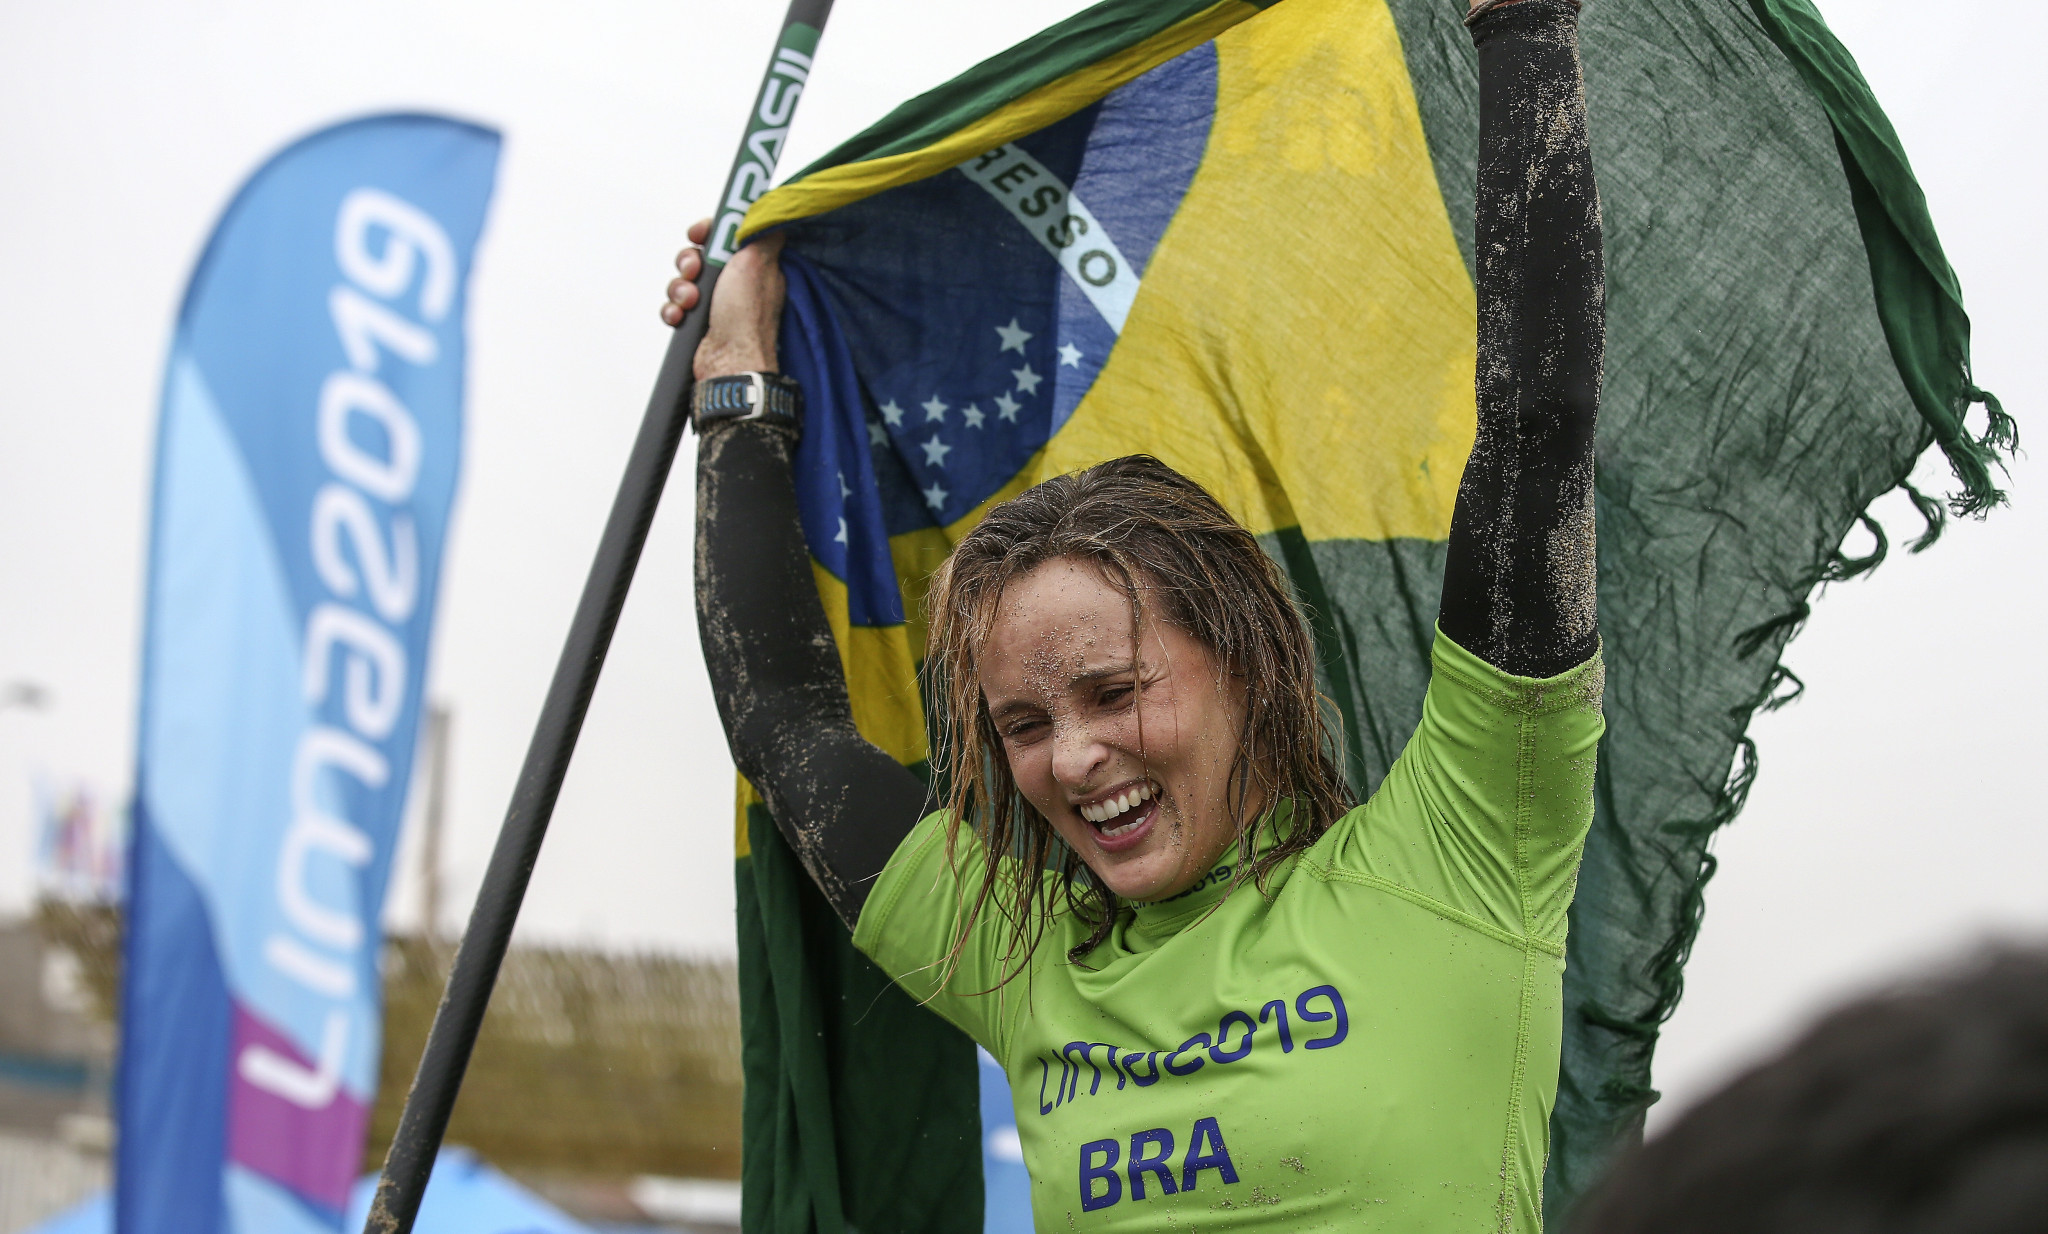 Lena Guimaraes of Brazil was the winner in the women's SUP event ©Lima 2019